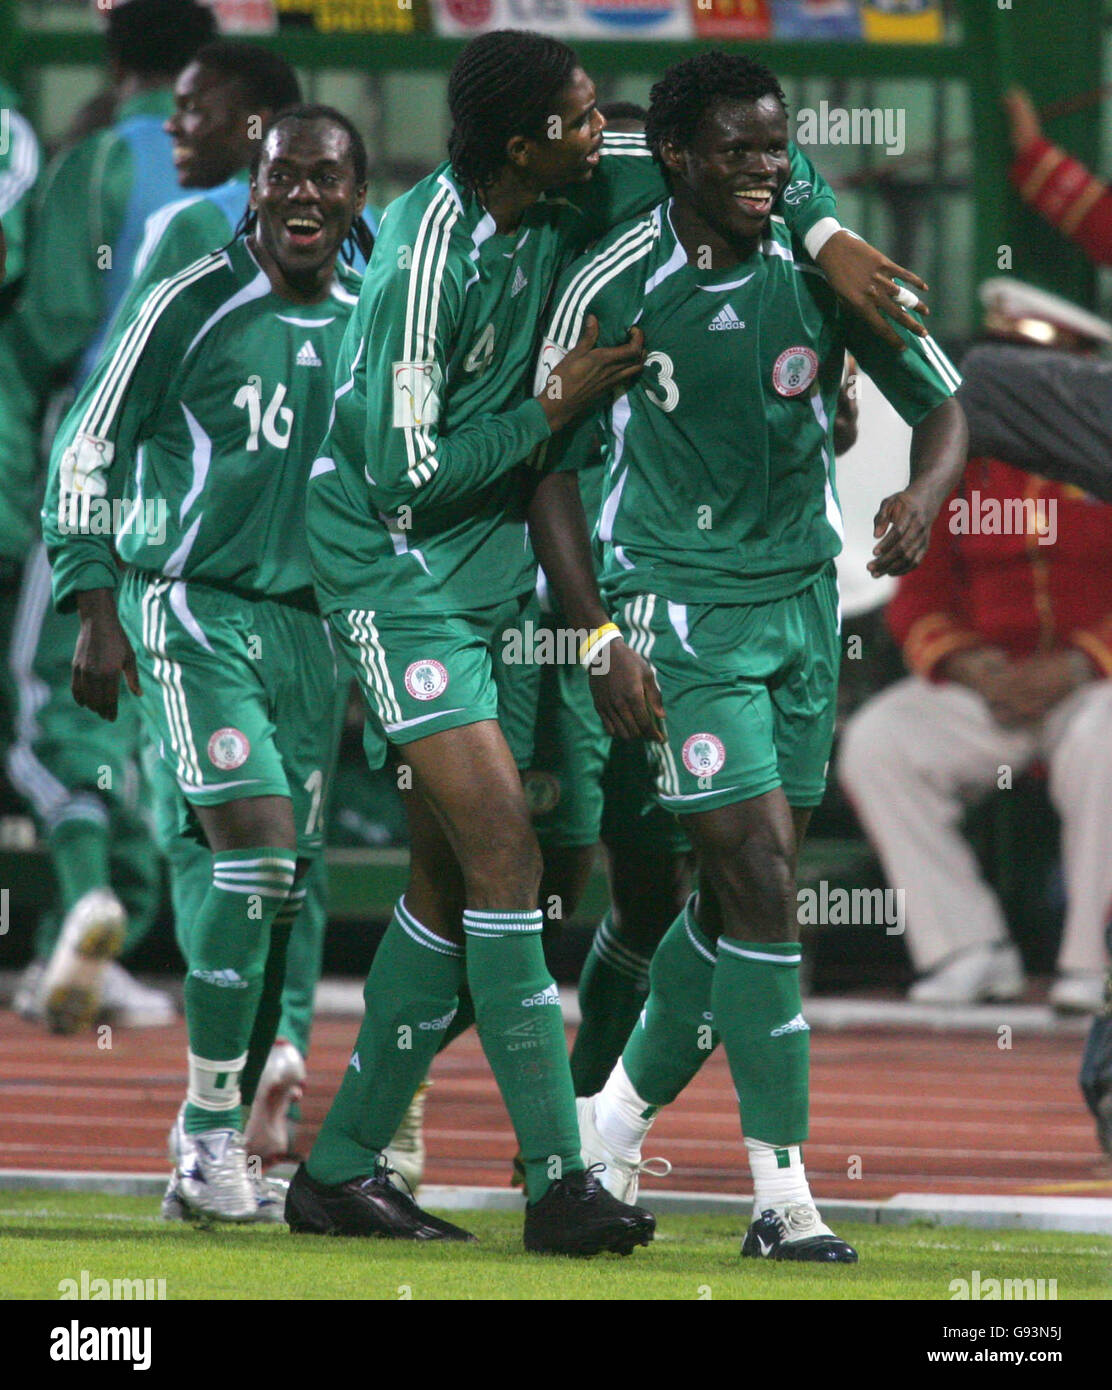 Nigeria's Kanu and his team mates congratulate Ismaila Taye-Taiwo on scoring the only goal of the game Stock Photo